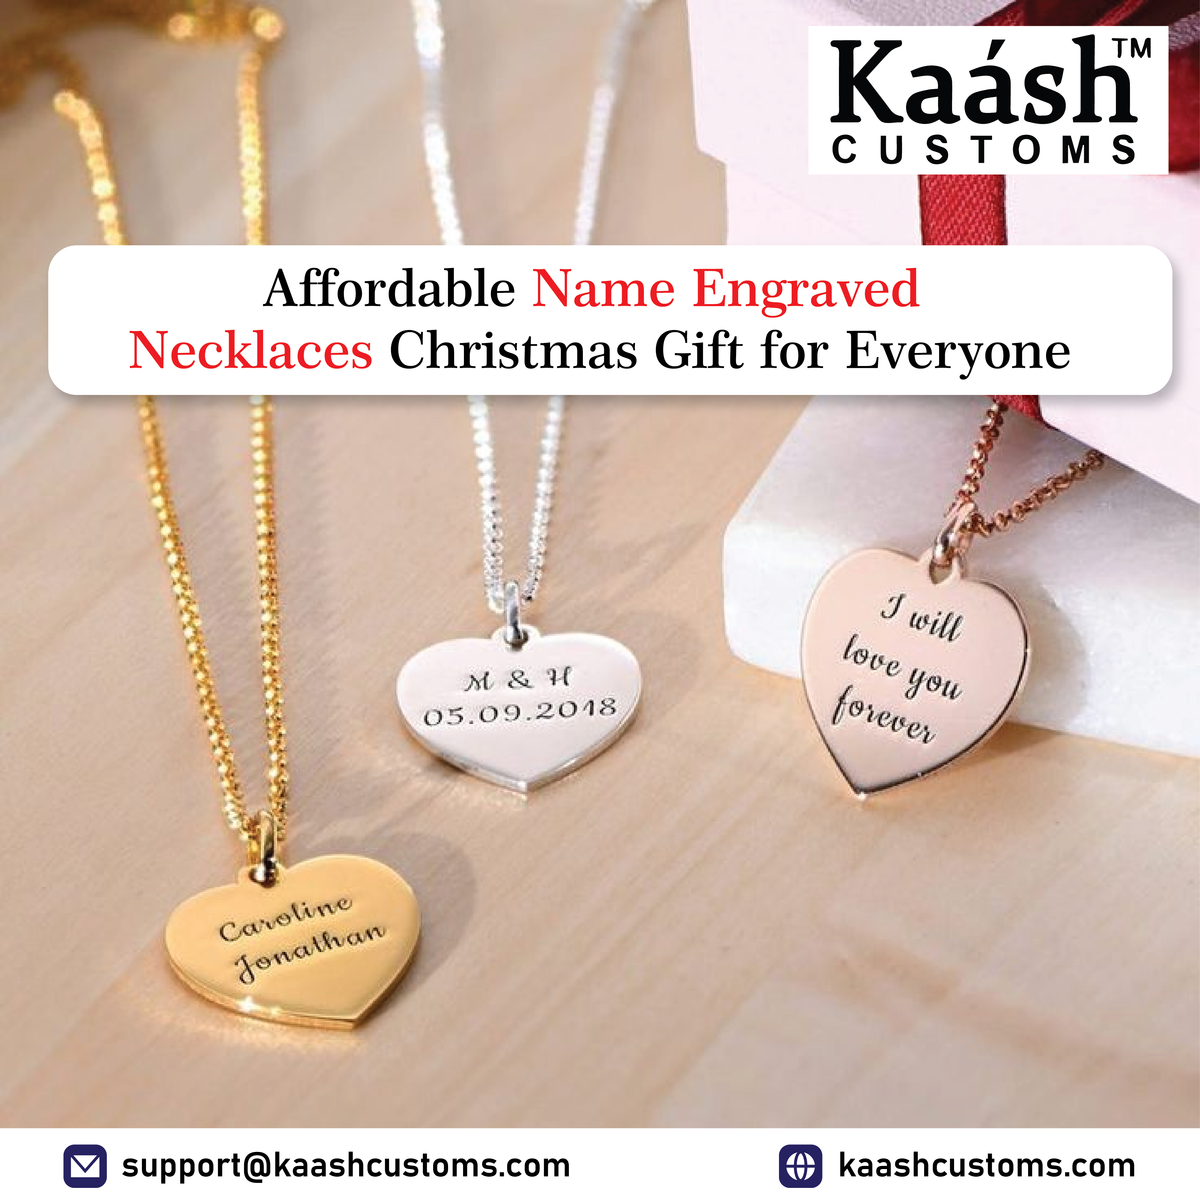 Affordable Name Engraved Necklaces Christmas Gift for Everyone – Kaash Customs